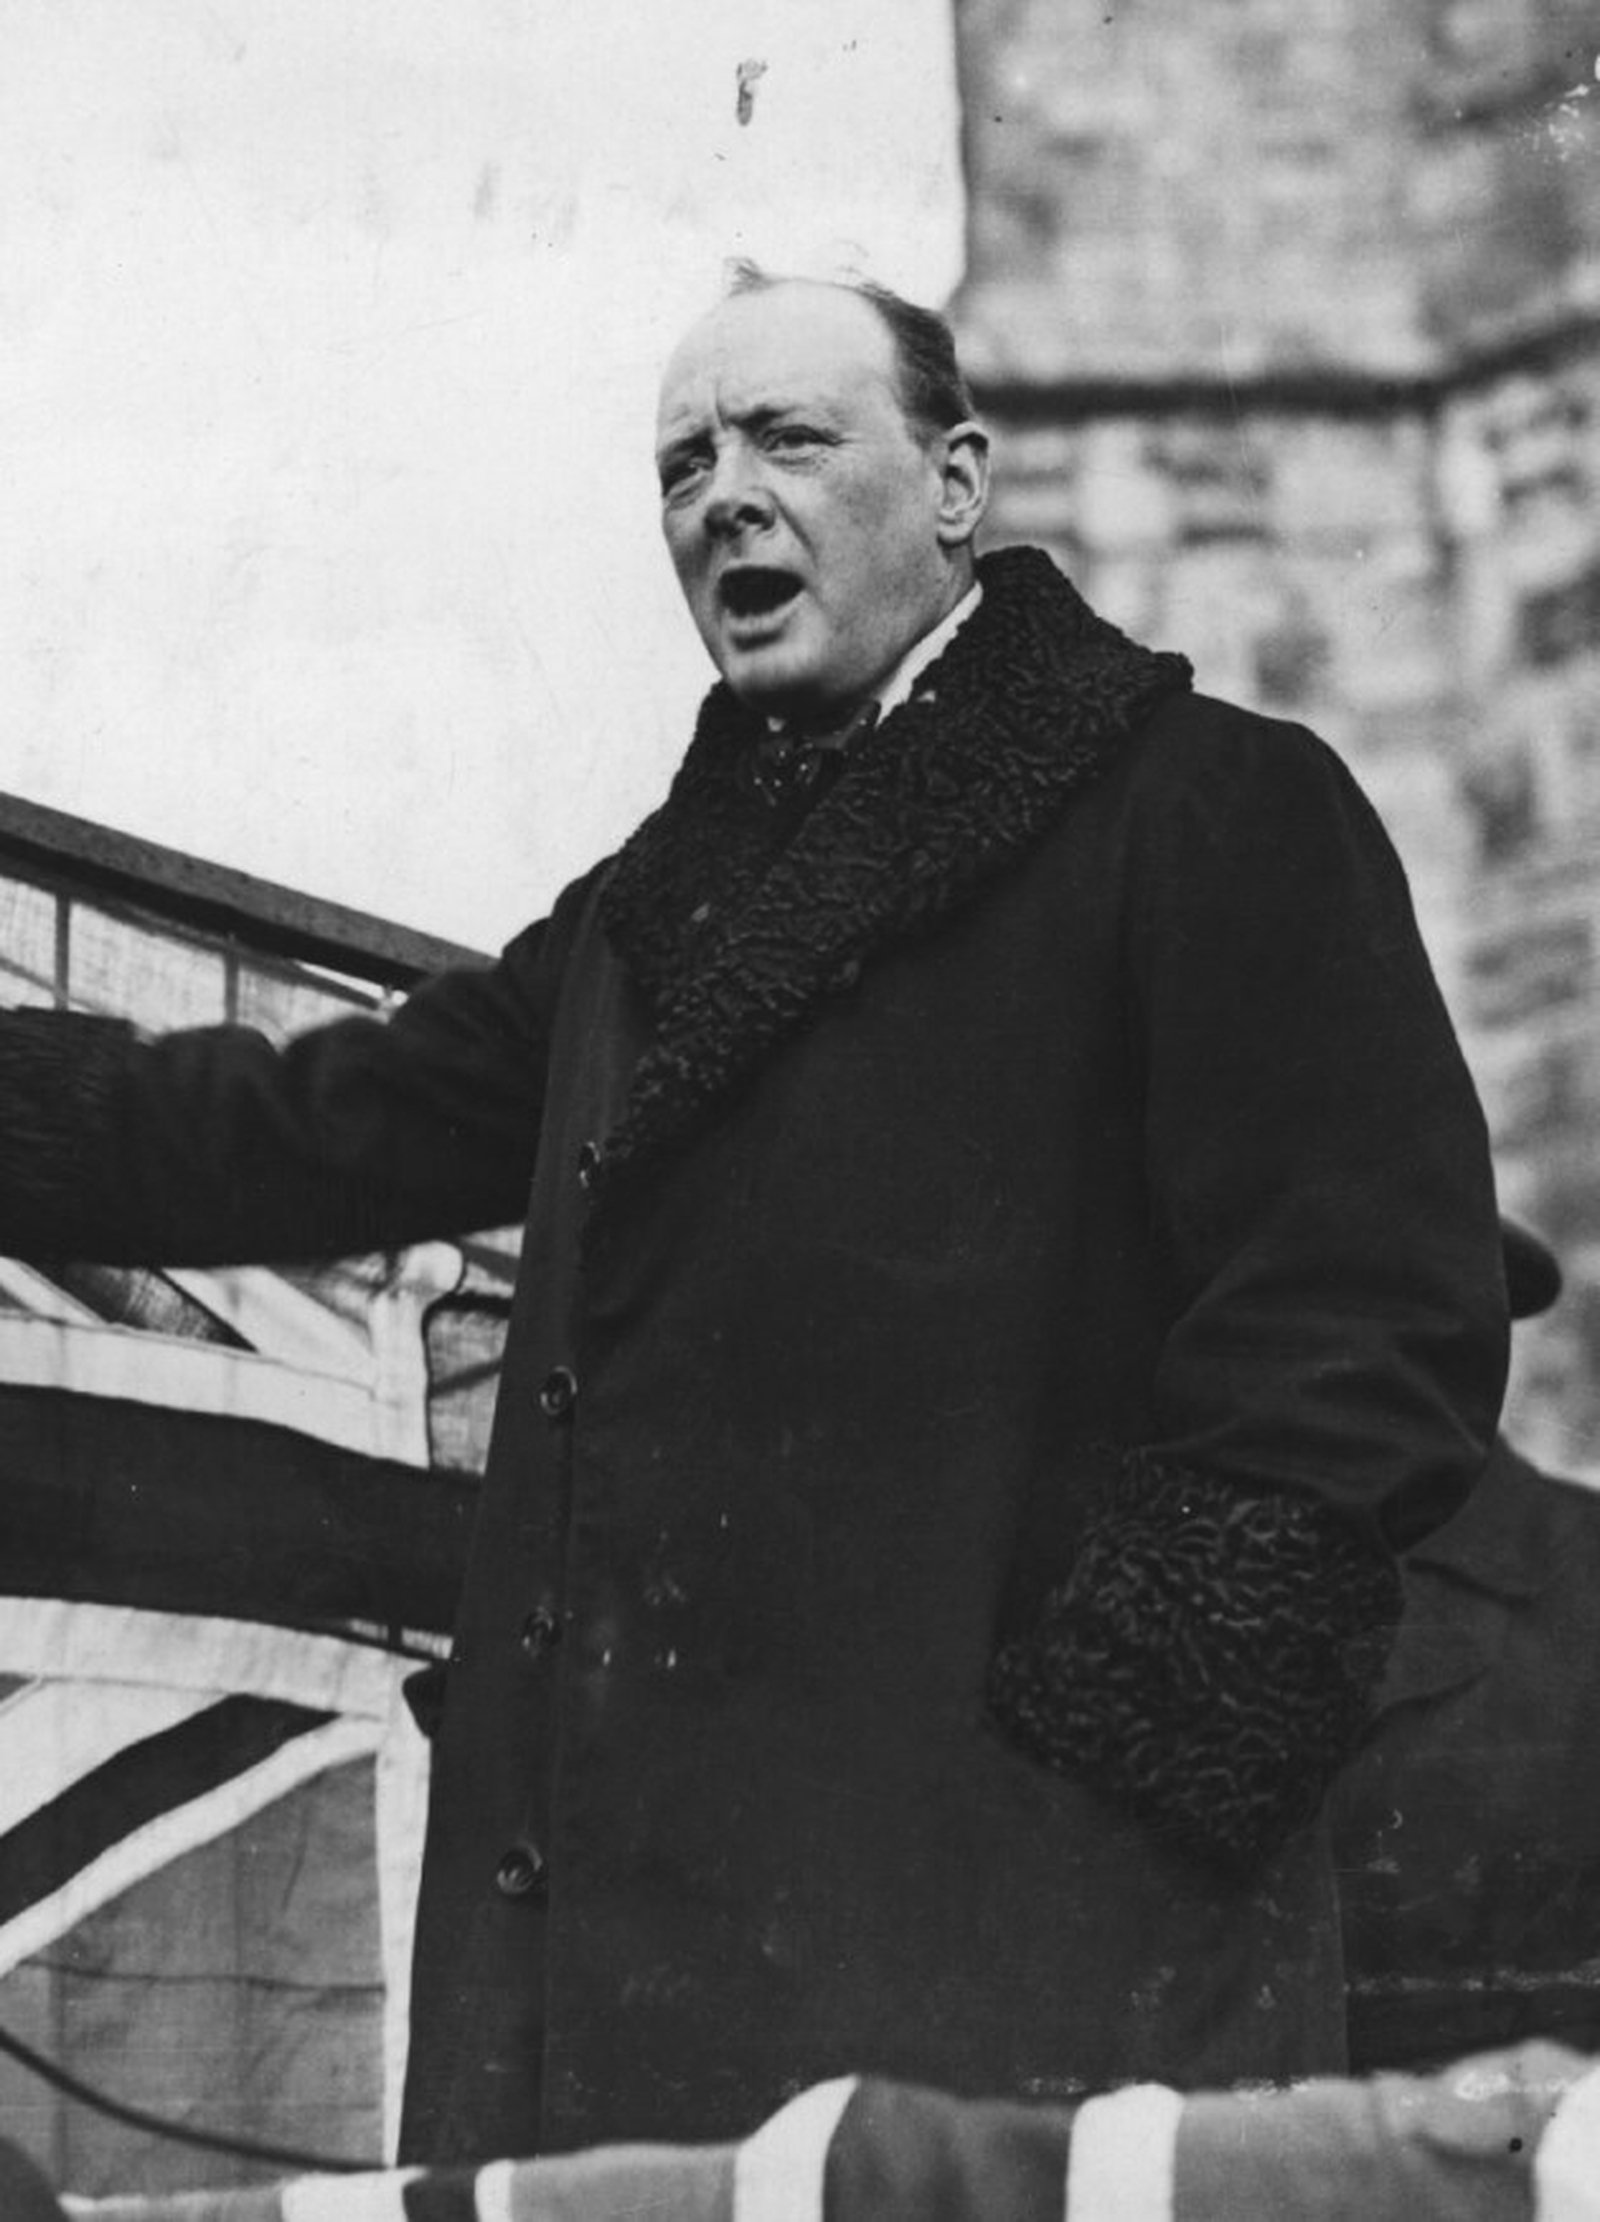 Image - Winston Churchill (Credit: Getty Images)